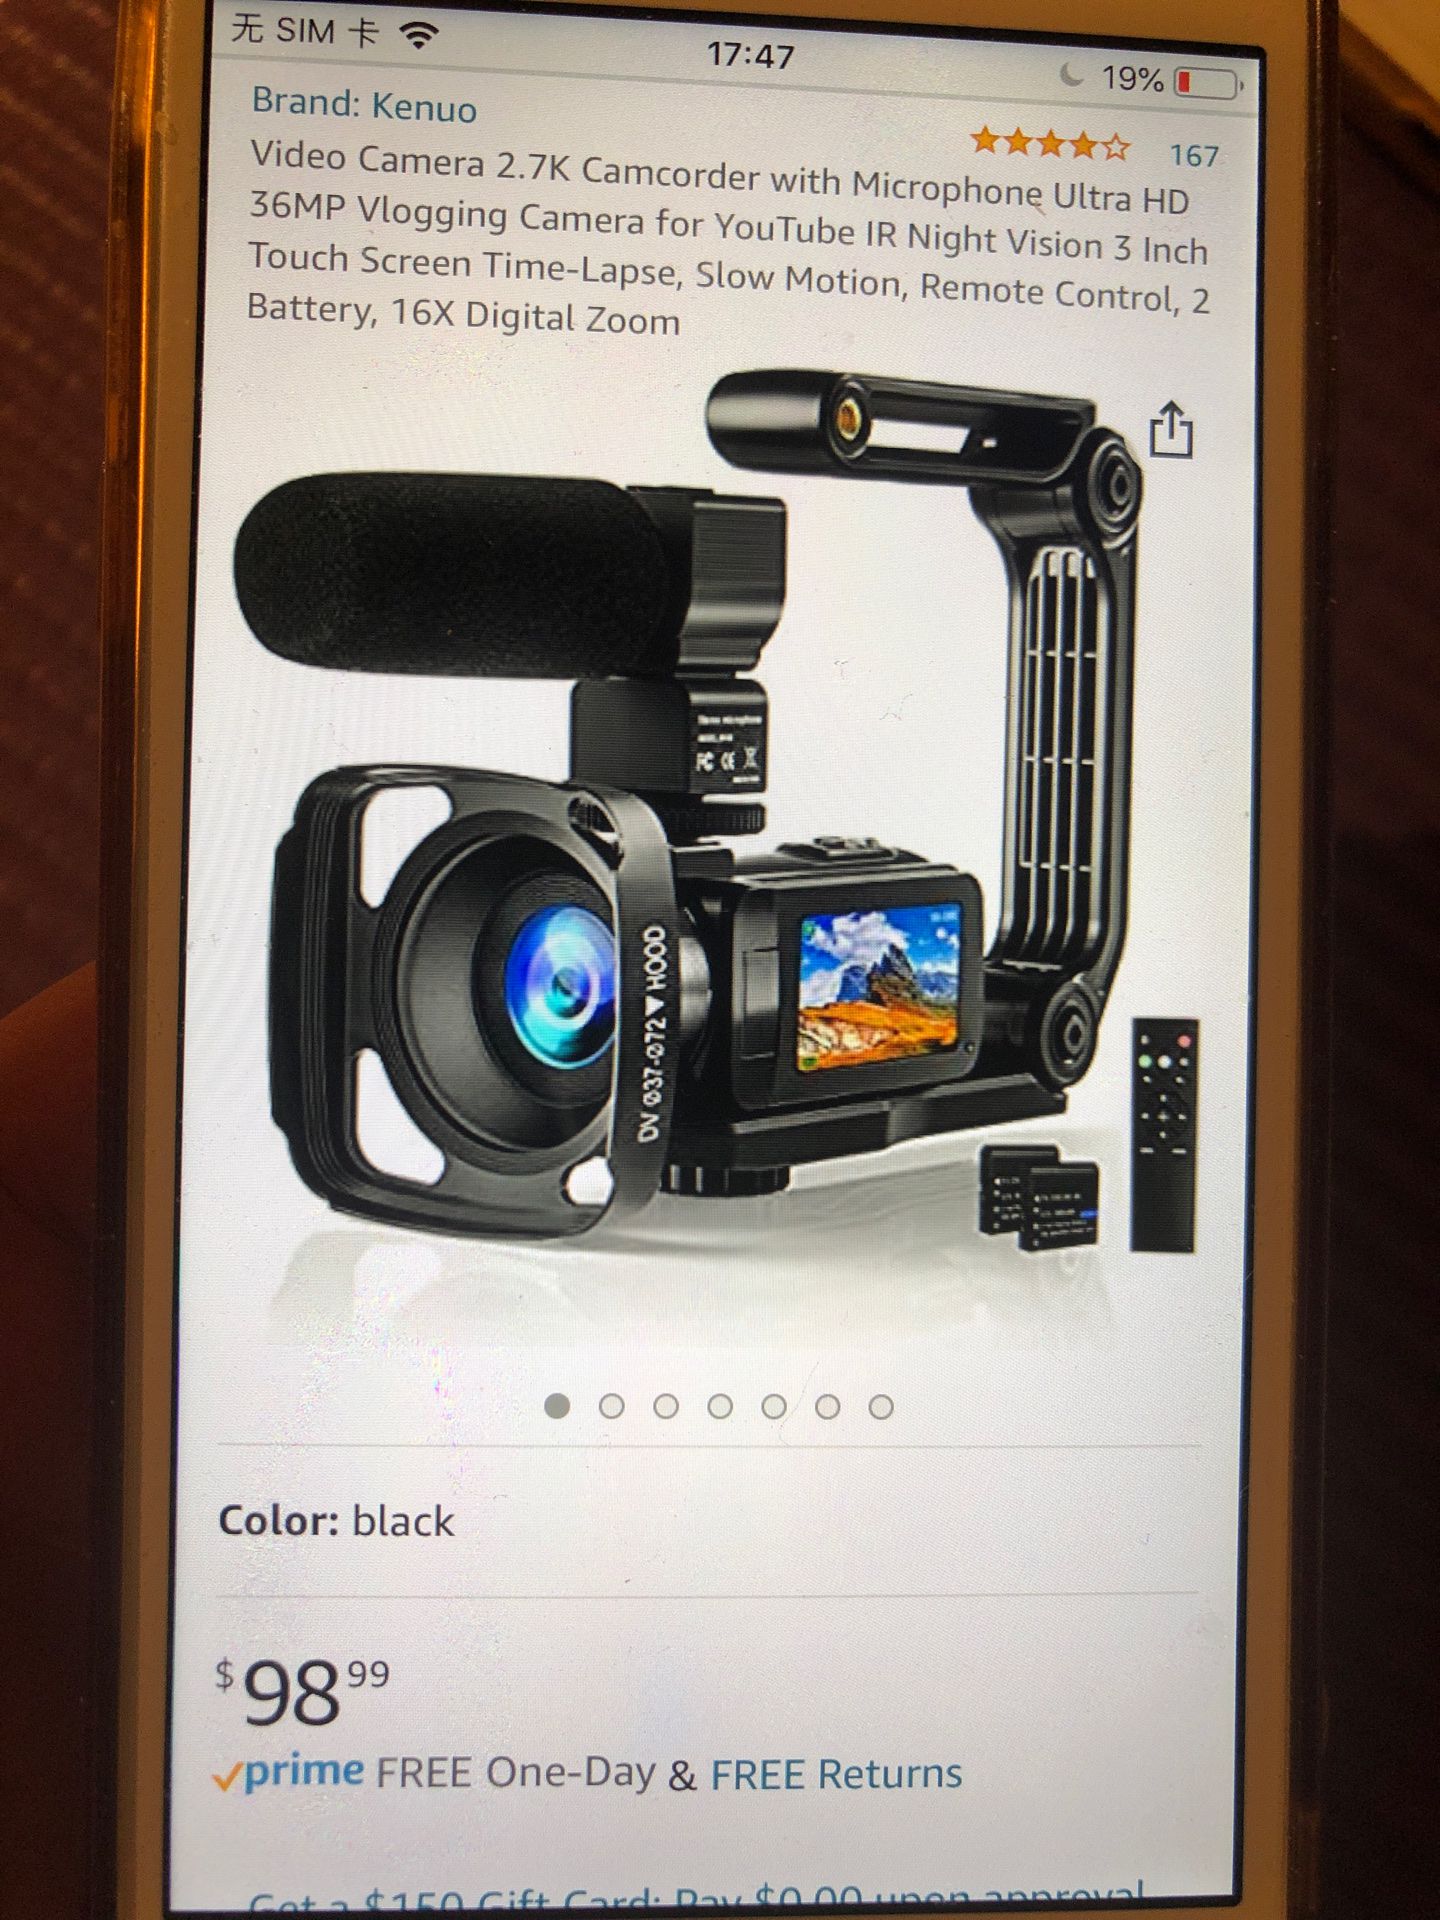 🔥best offer Video camera 2.7k camcorder with microphone